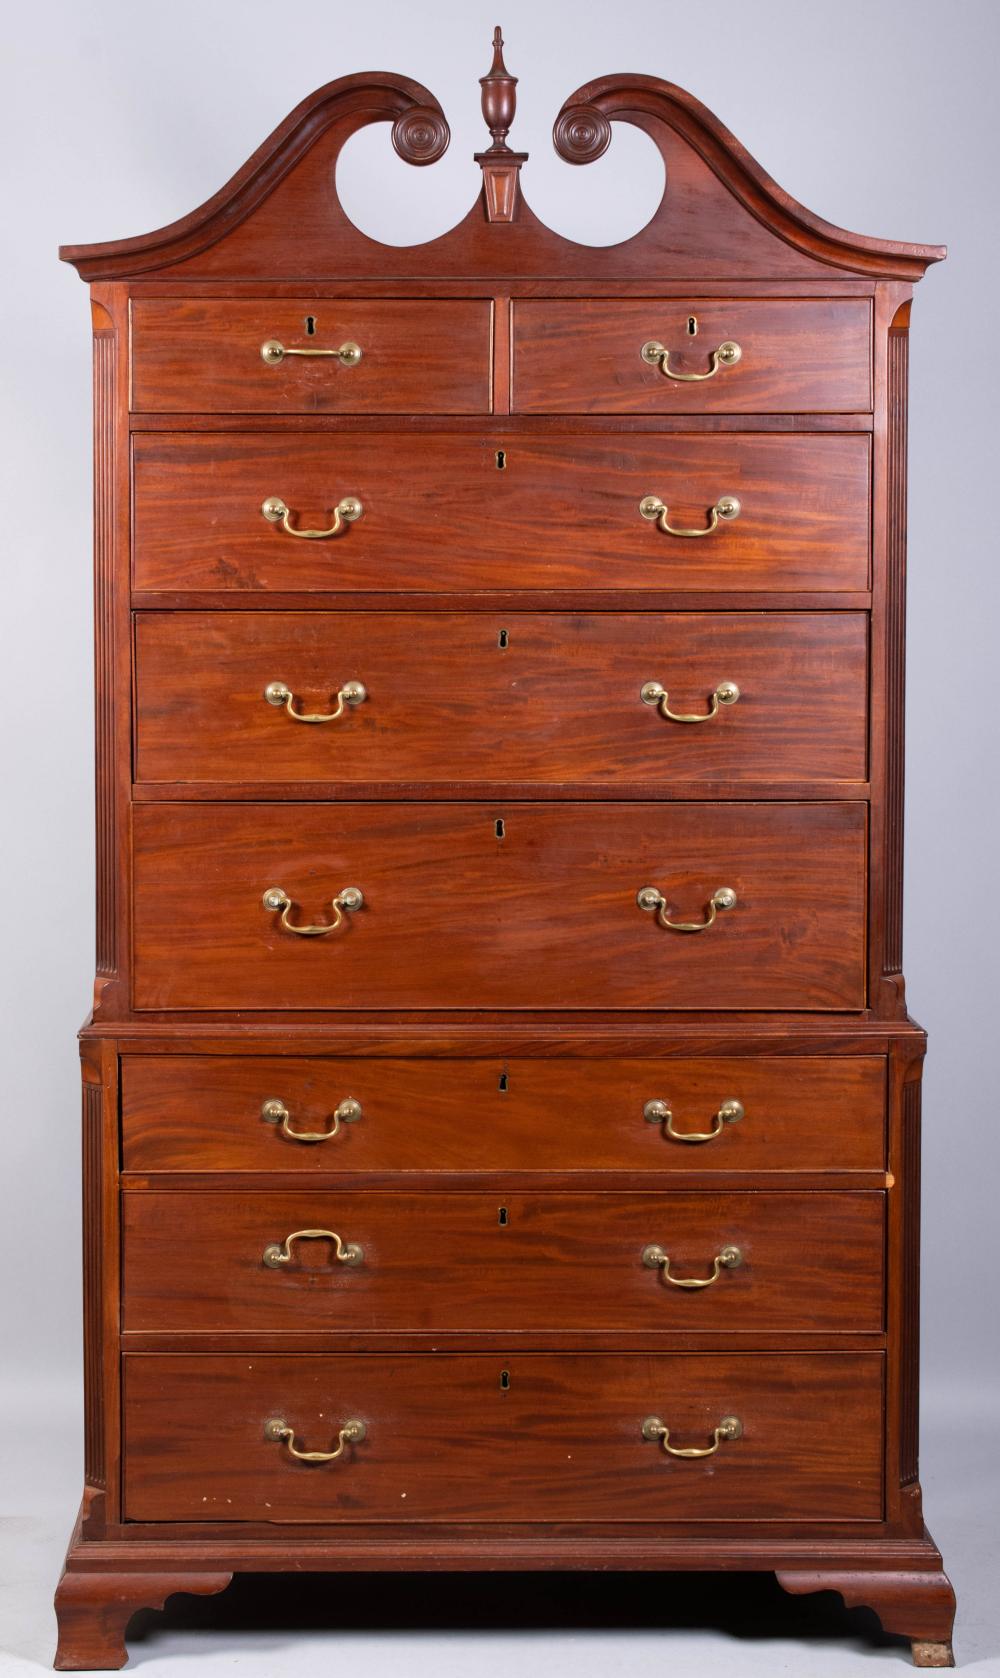 CHIPPENDALE STYLE MAHOGANY CHEST 33c918